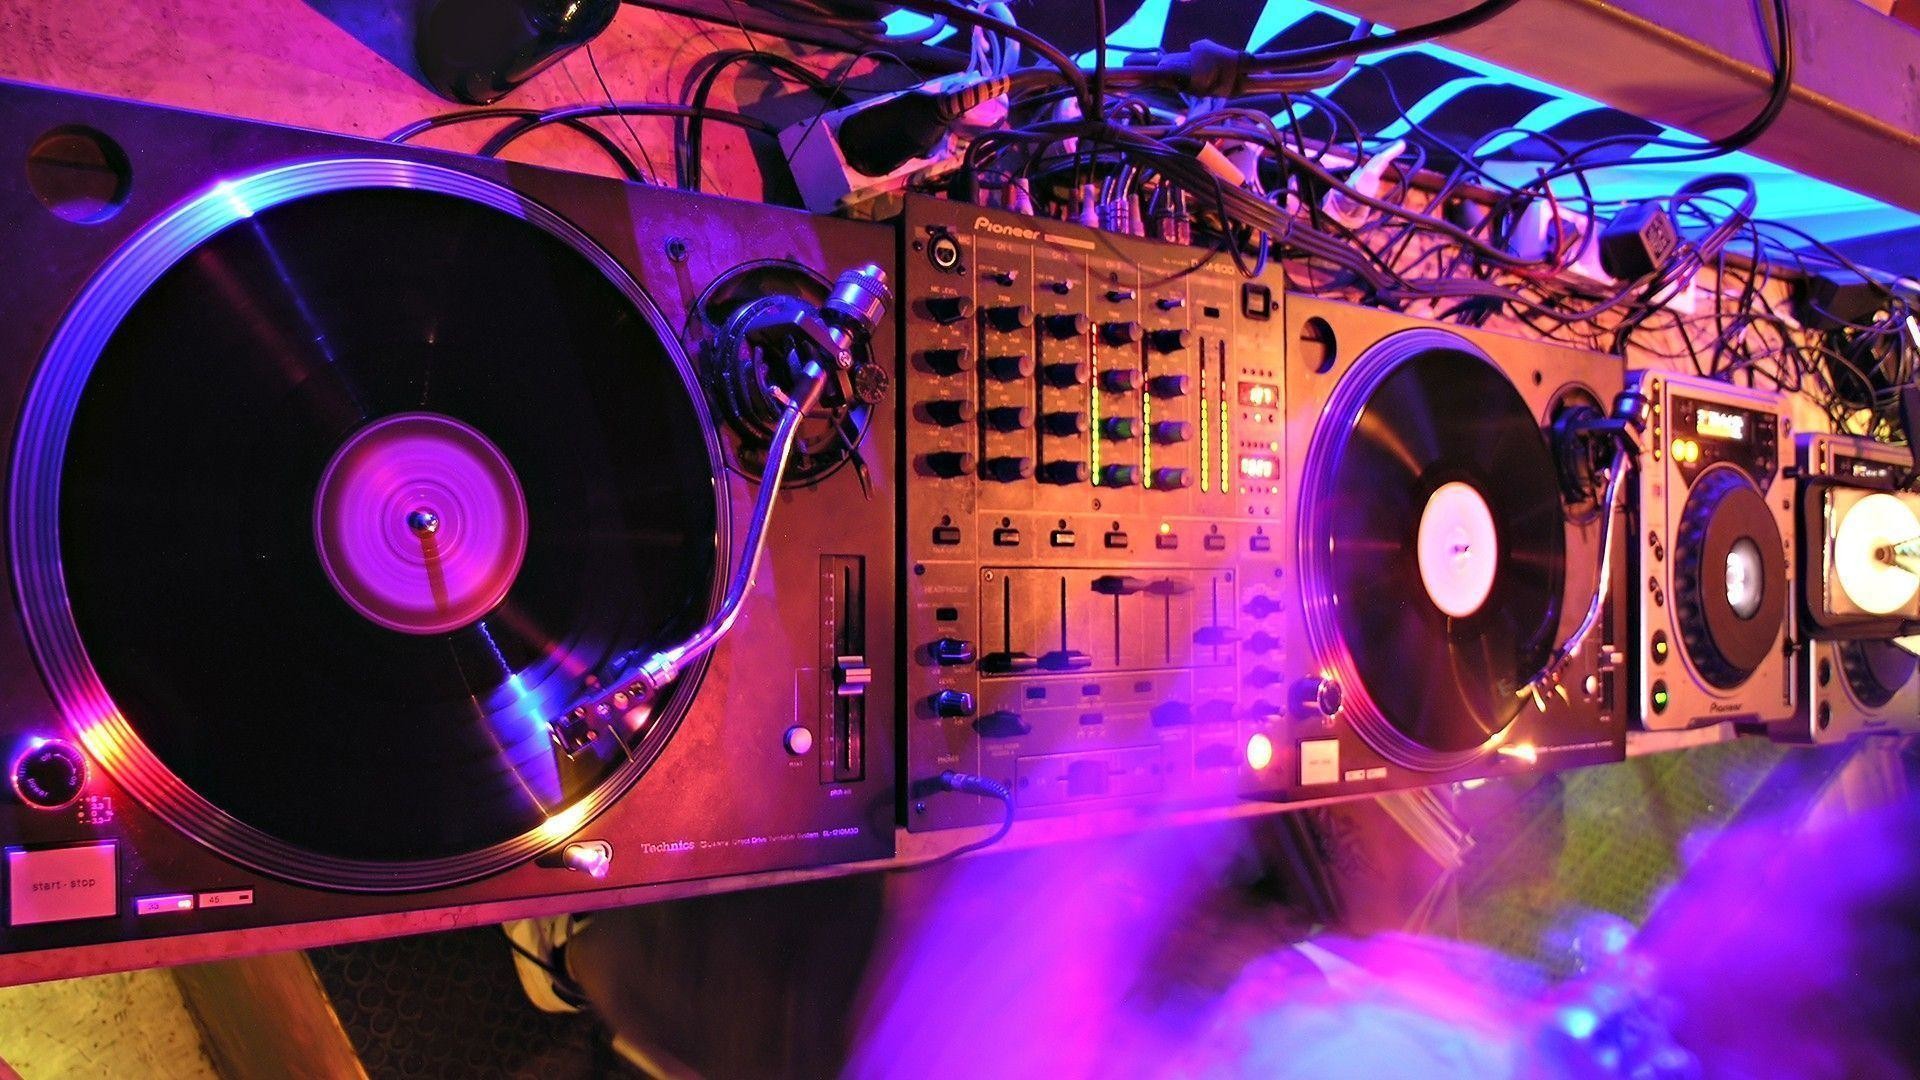 1920x1080 Dj Mixing Console Wallpaper  px Free Download .